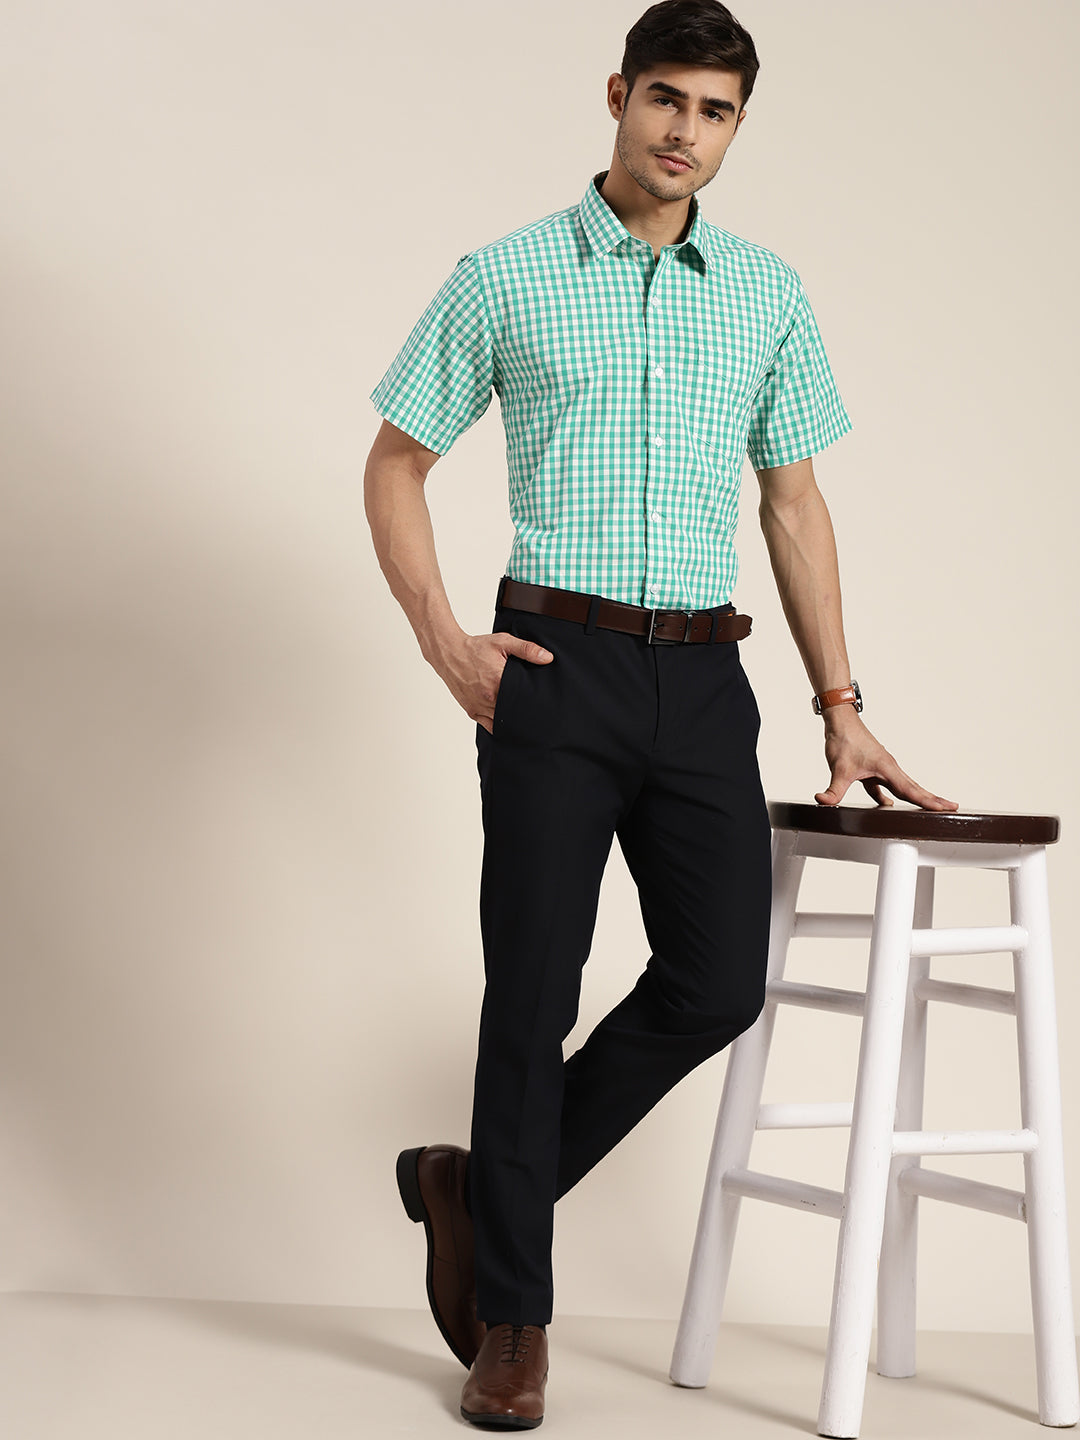 Man in Green Shirt and White Pants Sitting on Chair · Free Stock Photo